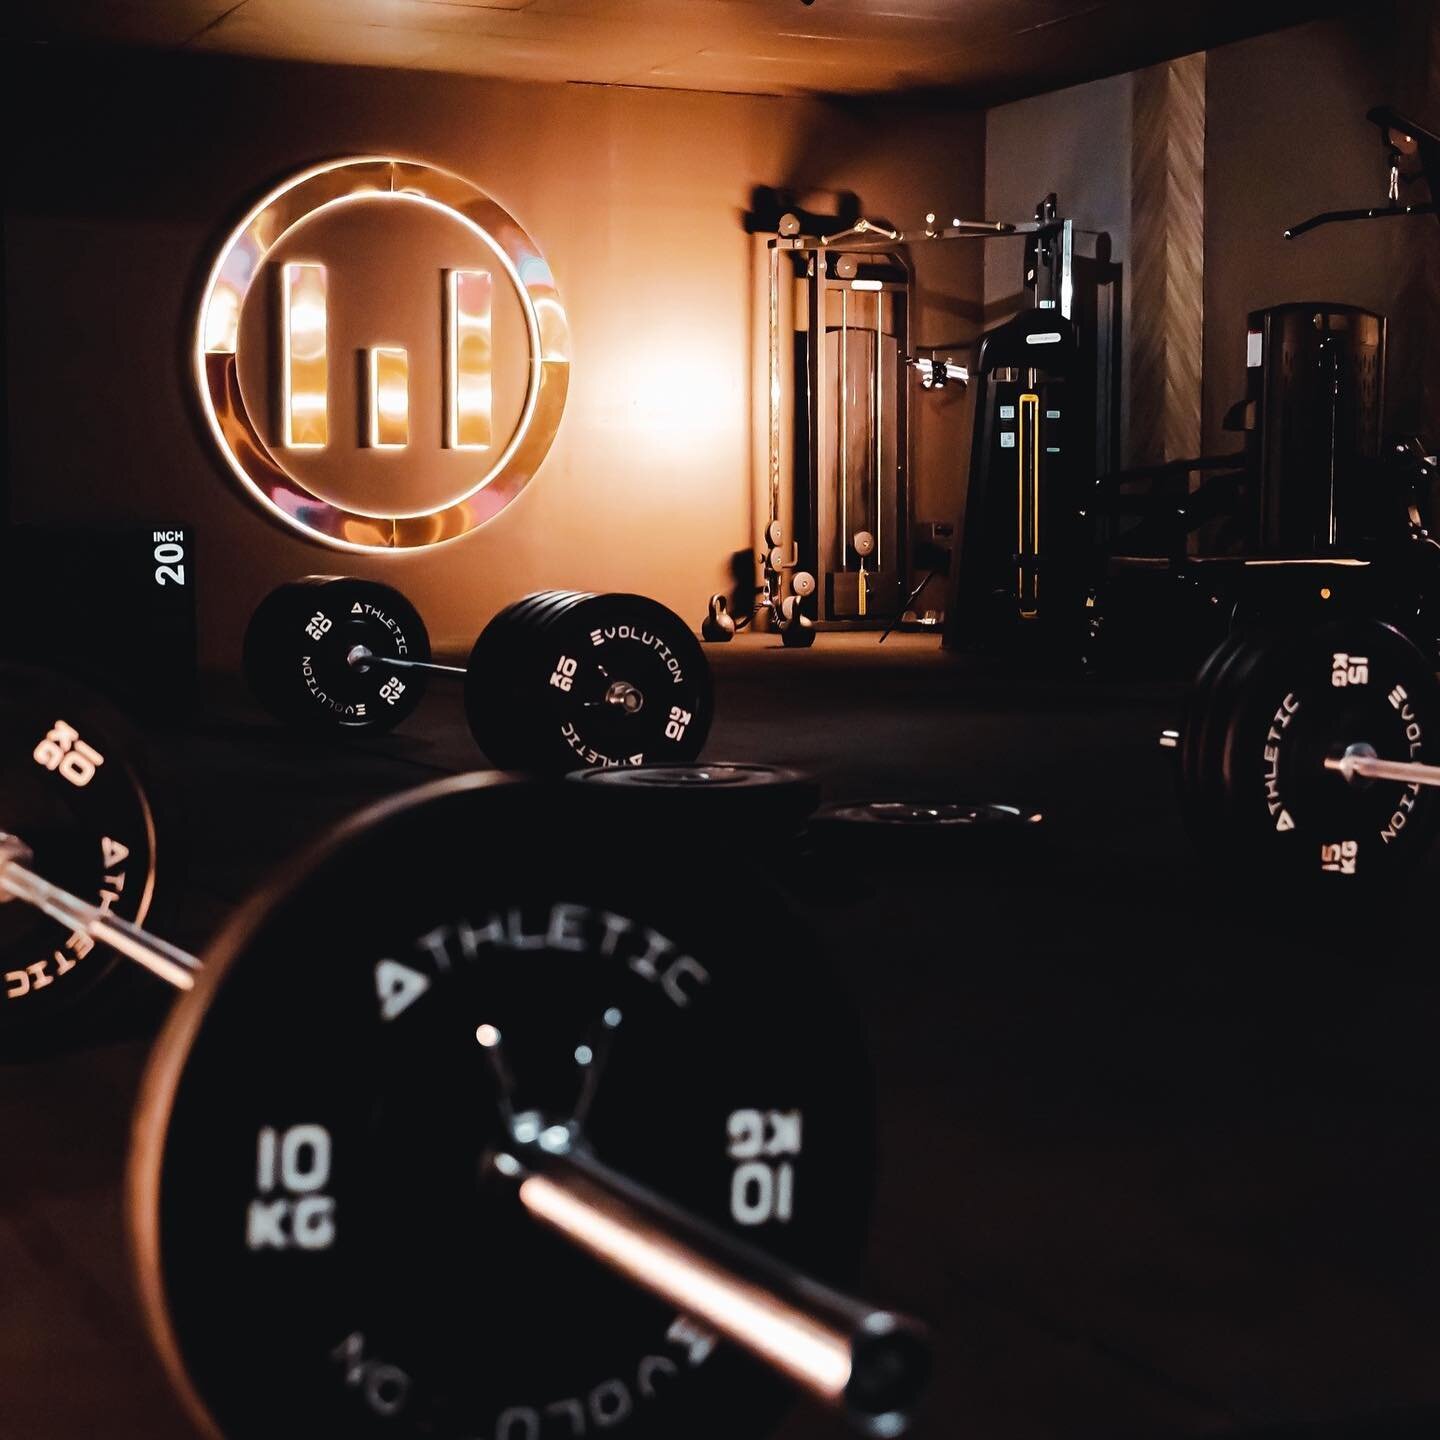 Our days are split between upper, lower and conditioning so whatever your goal is, we can create a training schedule that has you progressing towards your goal. 

Our 2 week trial pass gives you access to unlimited classes for 2 weeks, so you can try